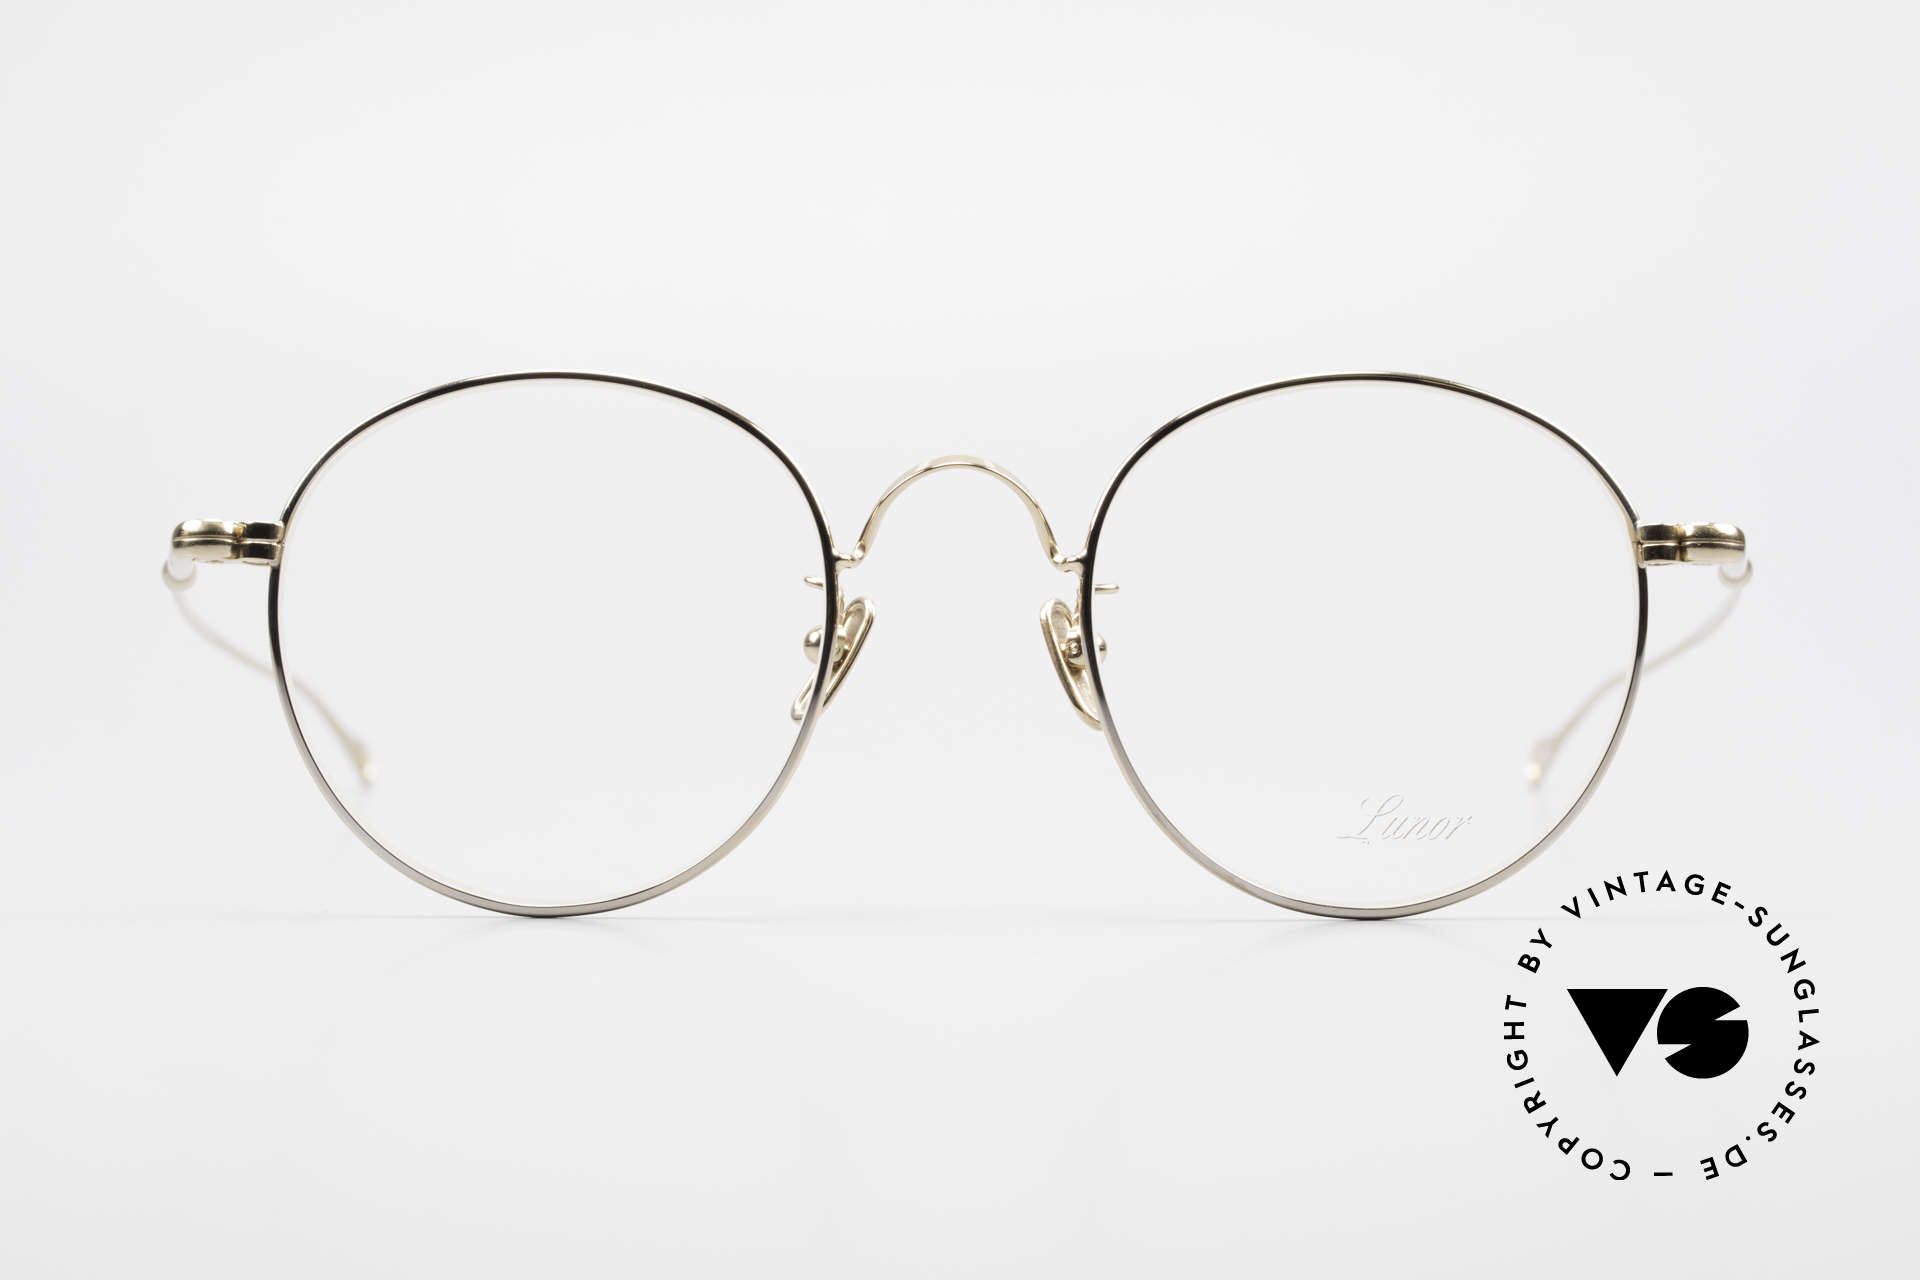 Lunor V 111 Men's Panto Frame Gold Plated, without ostentatious logos (but in a timeless elegance), Made for Men